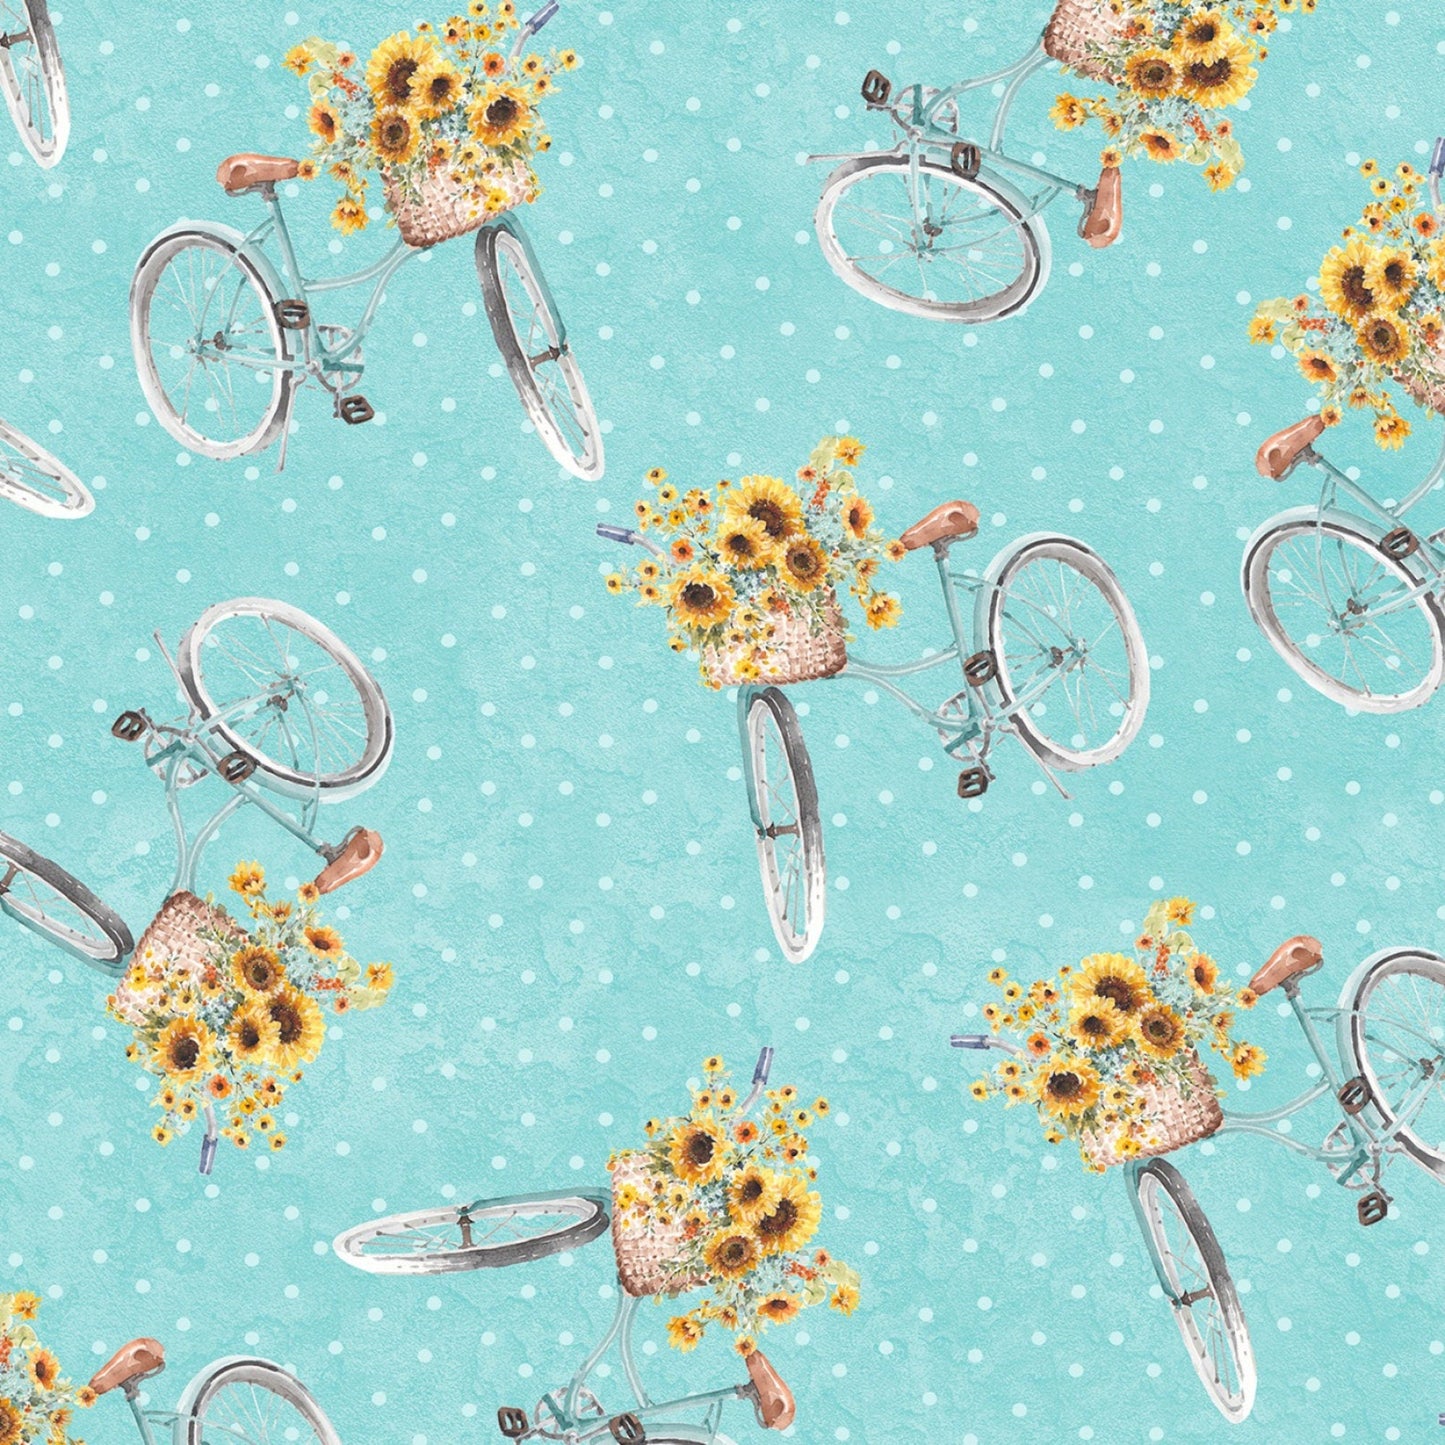 Wilmington Prints Blue / FQ (18"x21") Bicycles on light teal or Packed Sunflowers Fabric by the Yard from Wilmington Prints Sunflower Sweet by Lisa Audit